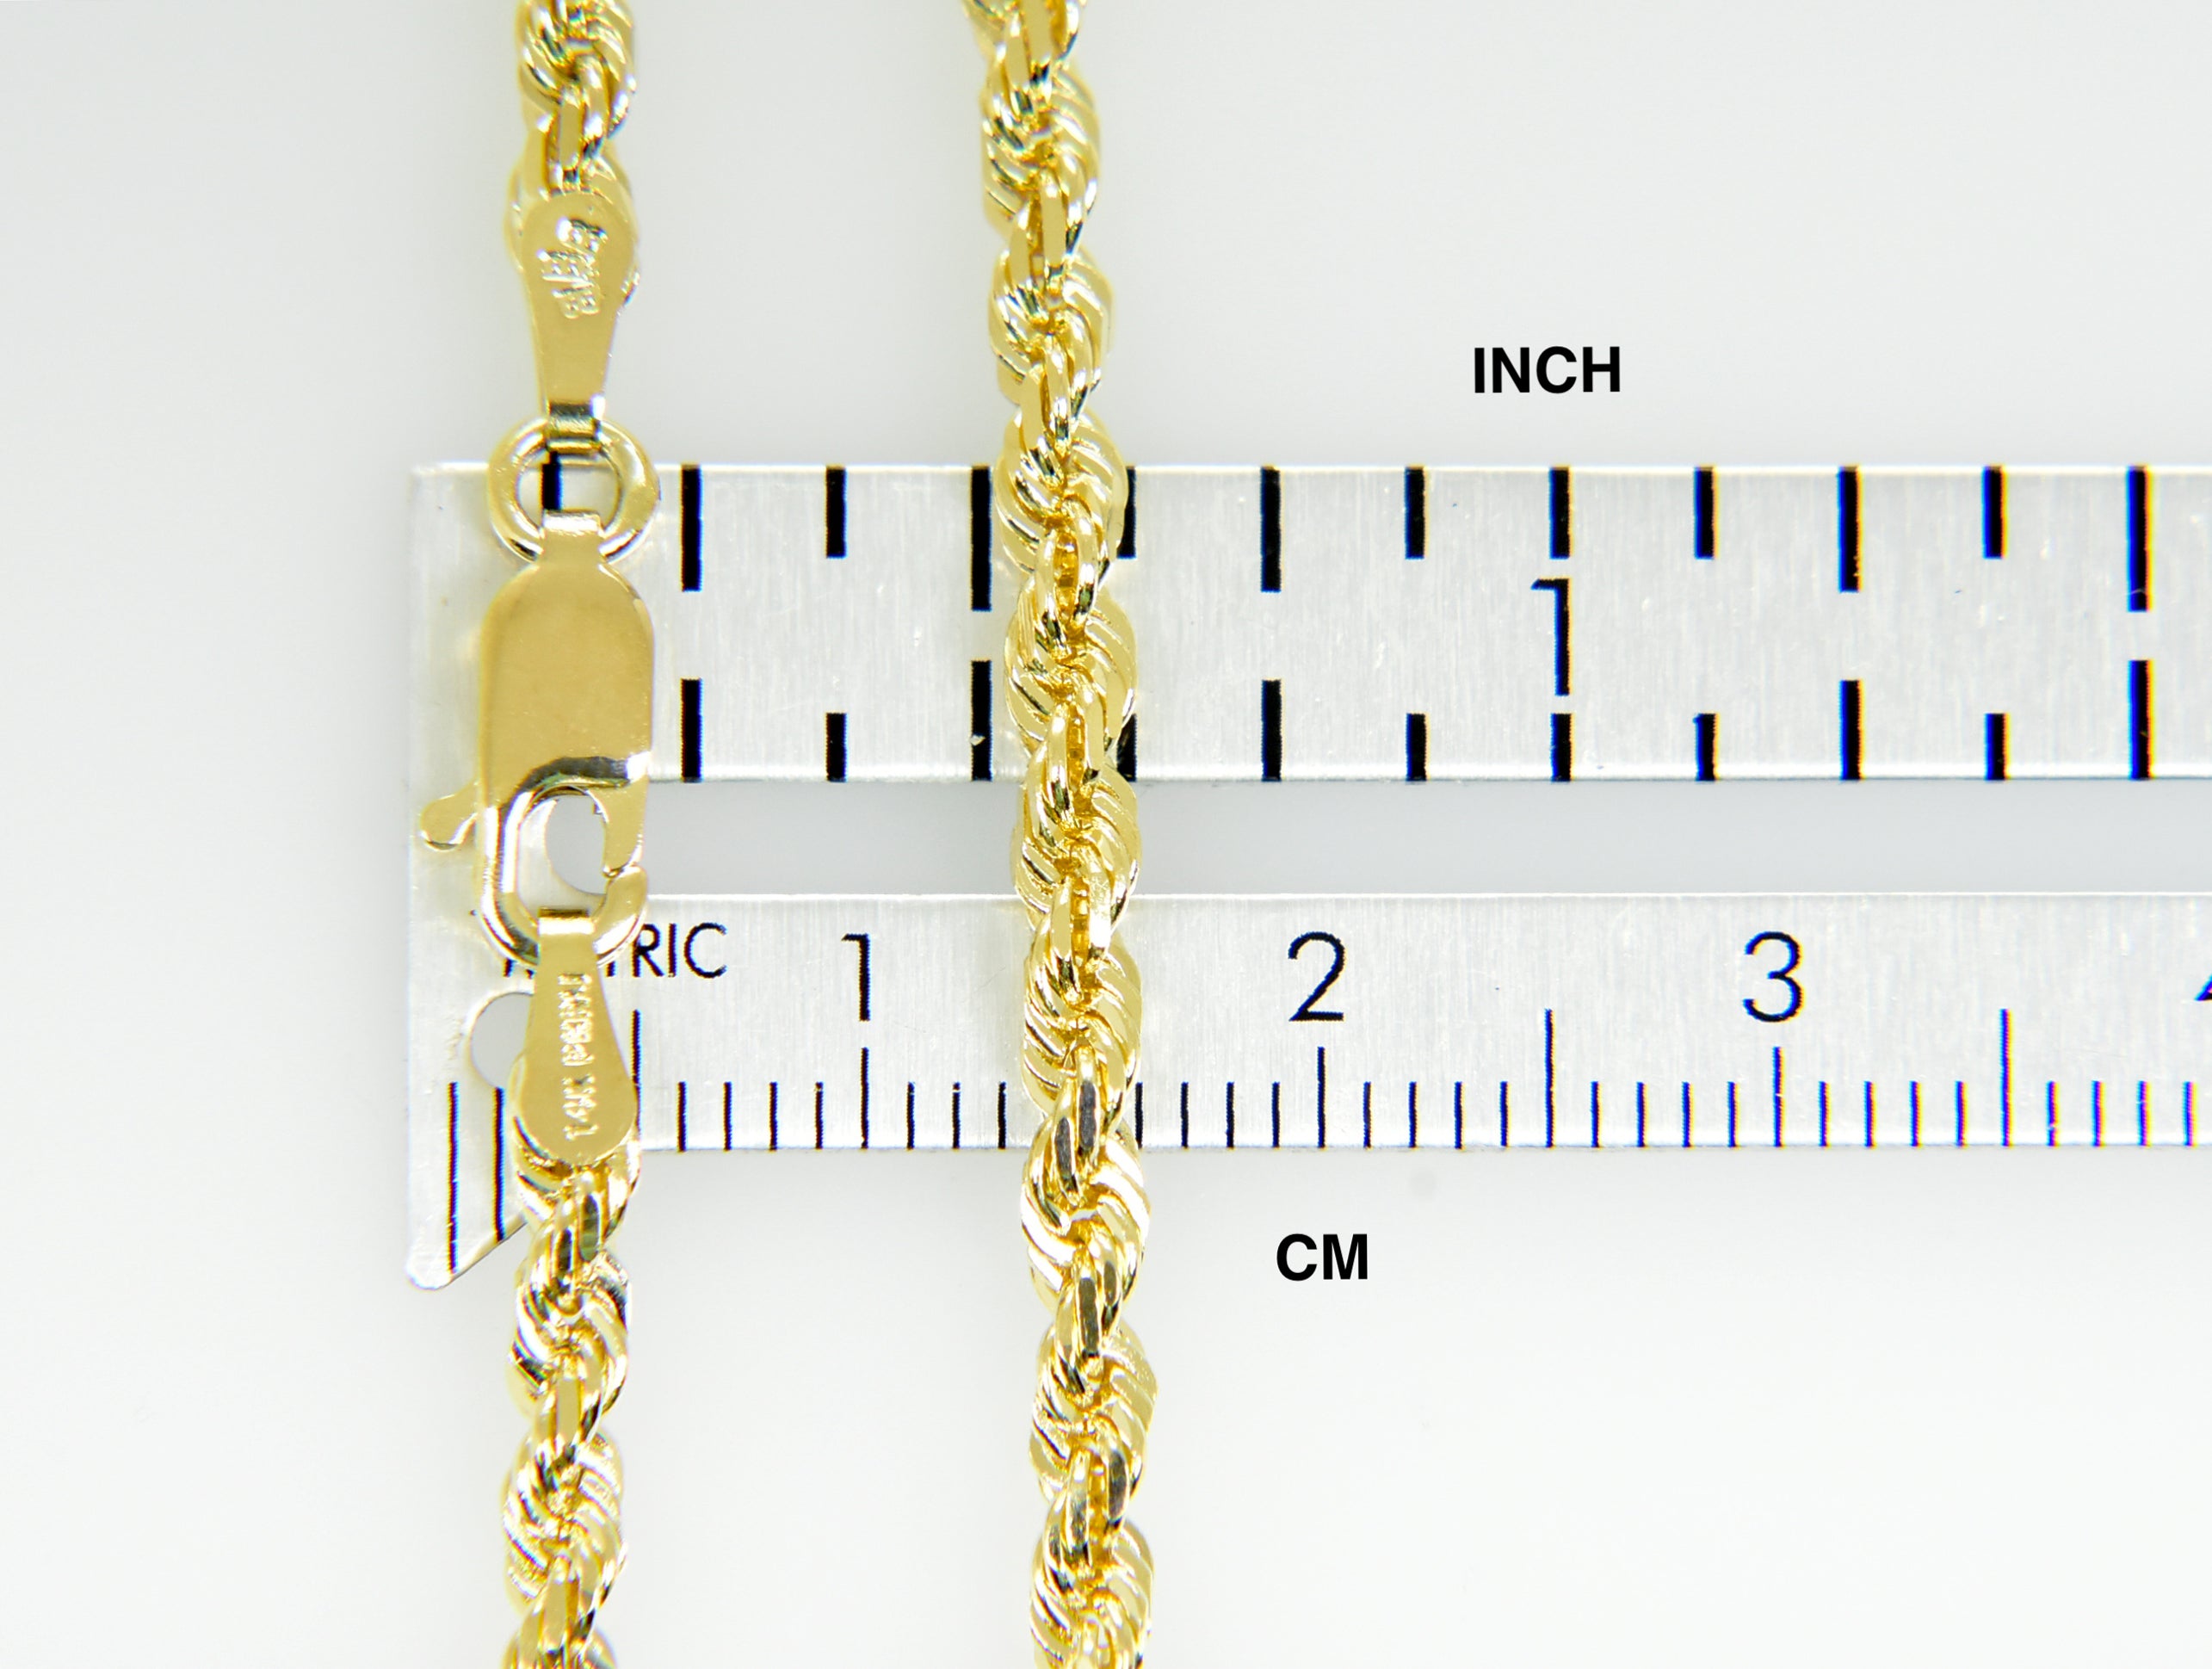 14K Solid Yellow Gold 3.2mm Diamond Cut Rope Bracelet Anklet Choker Necklace Pendant Chain